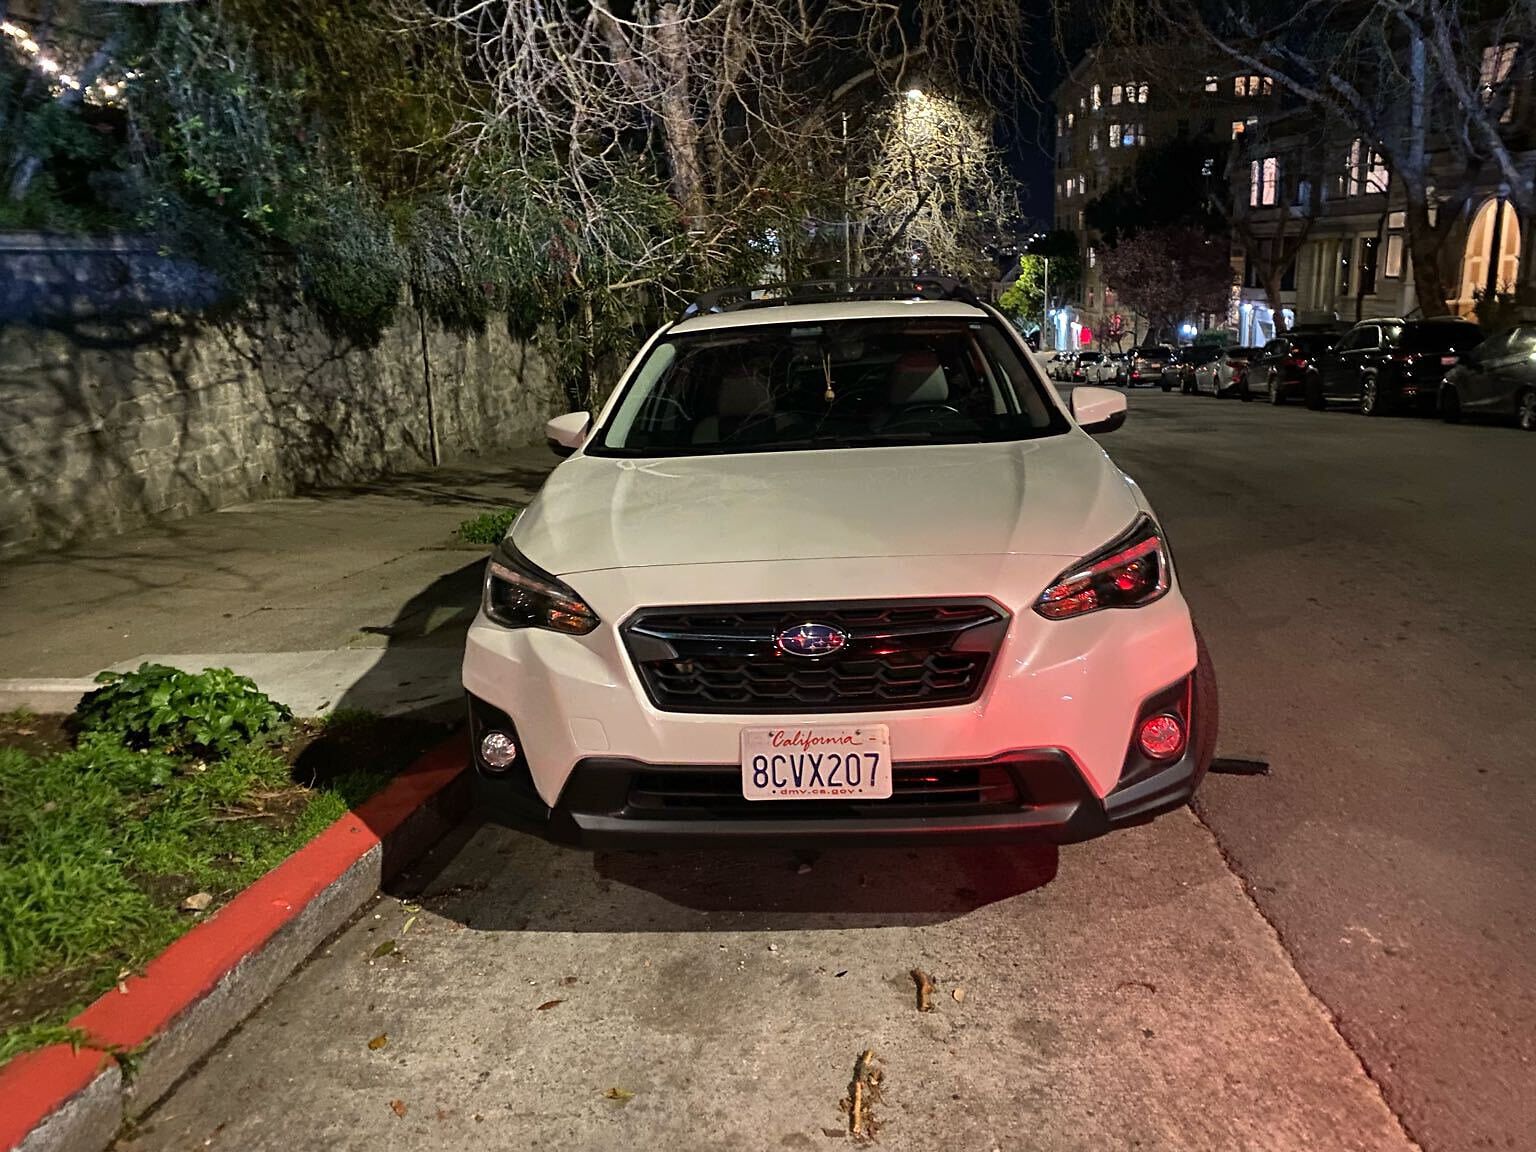 Photo of car in the street with license plate 8CVX207 in California